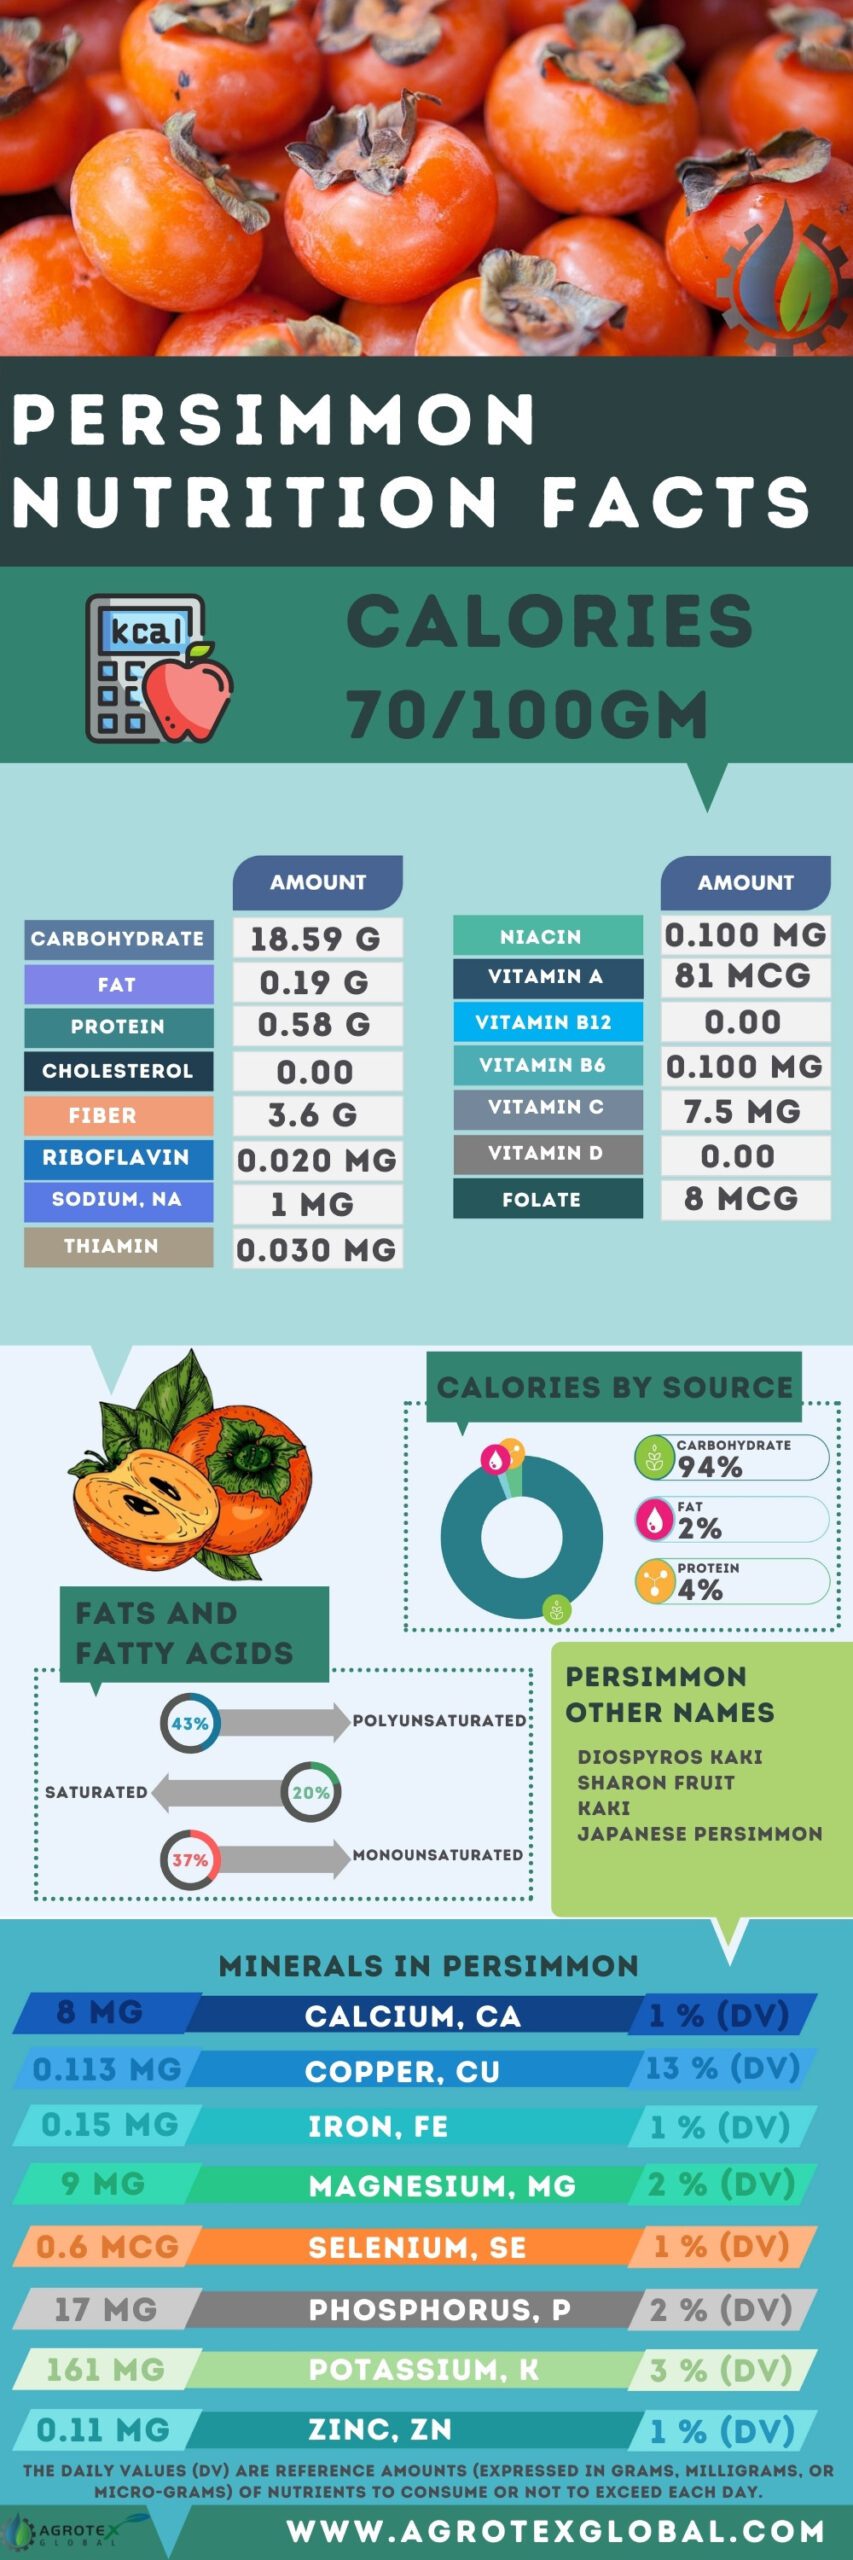 Persimmon NUTRITION FACTS calorie chart infographic